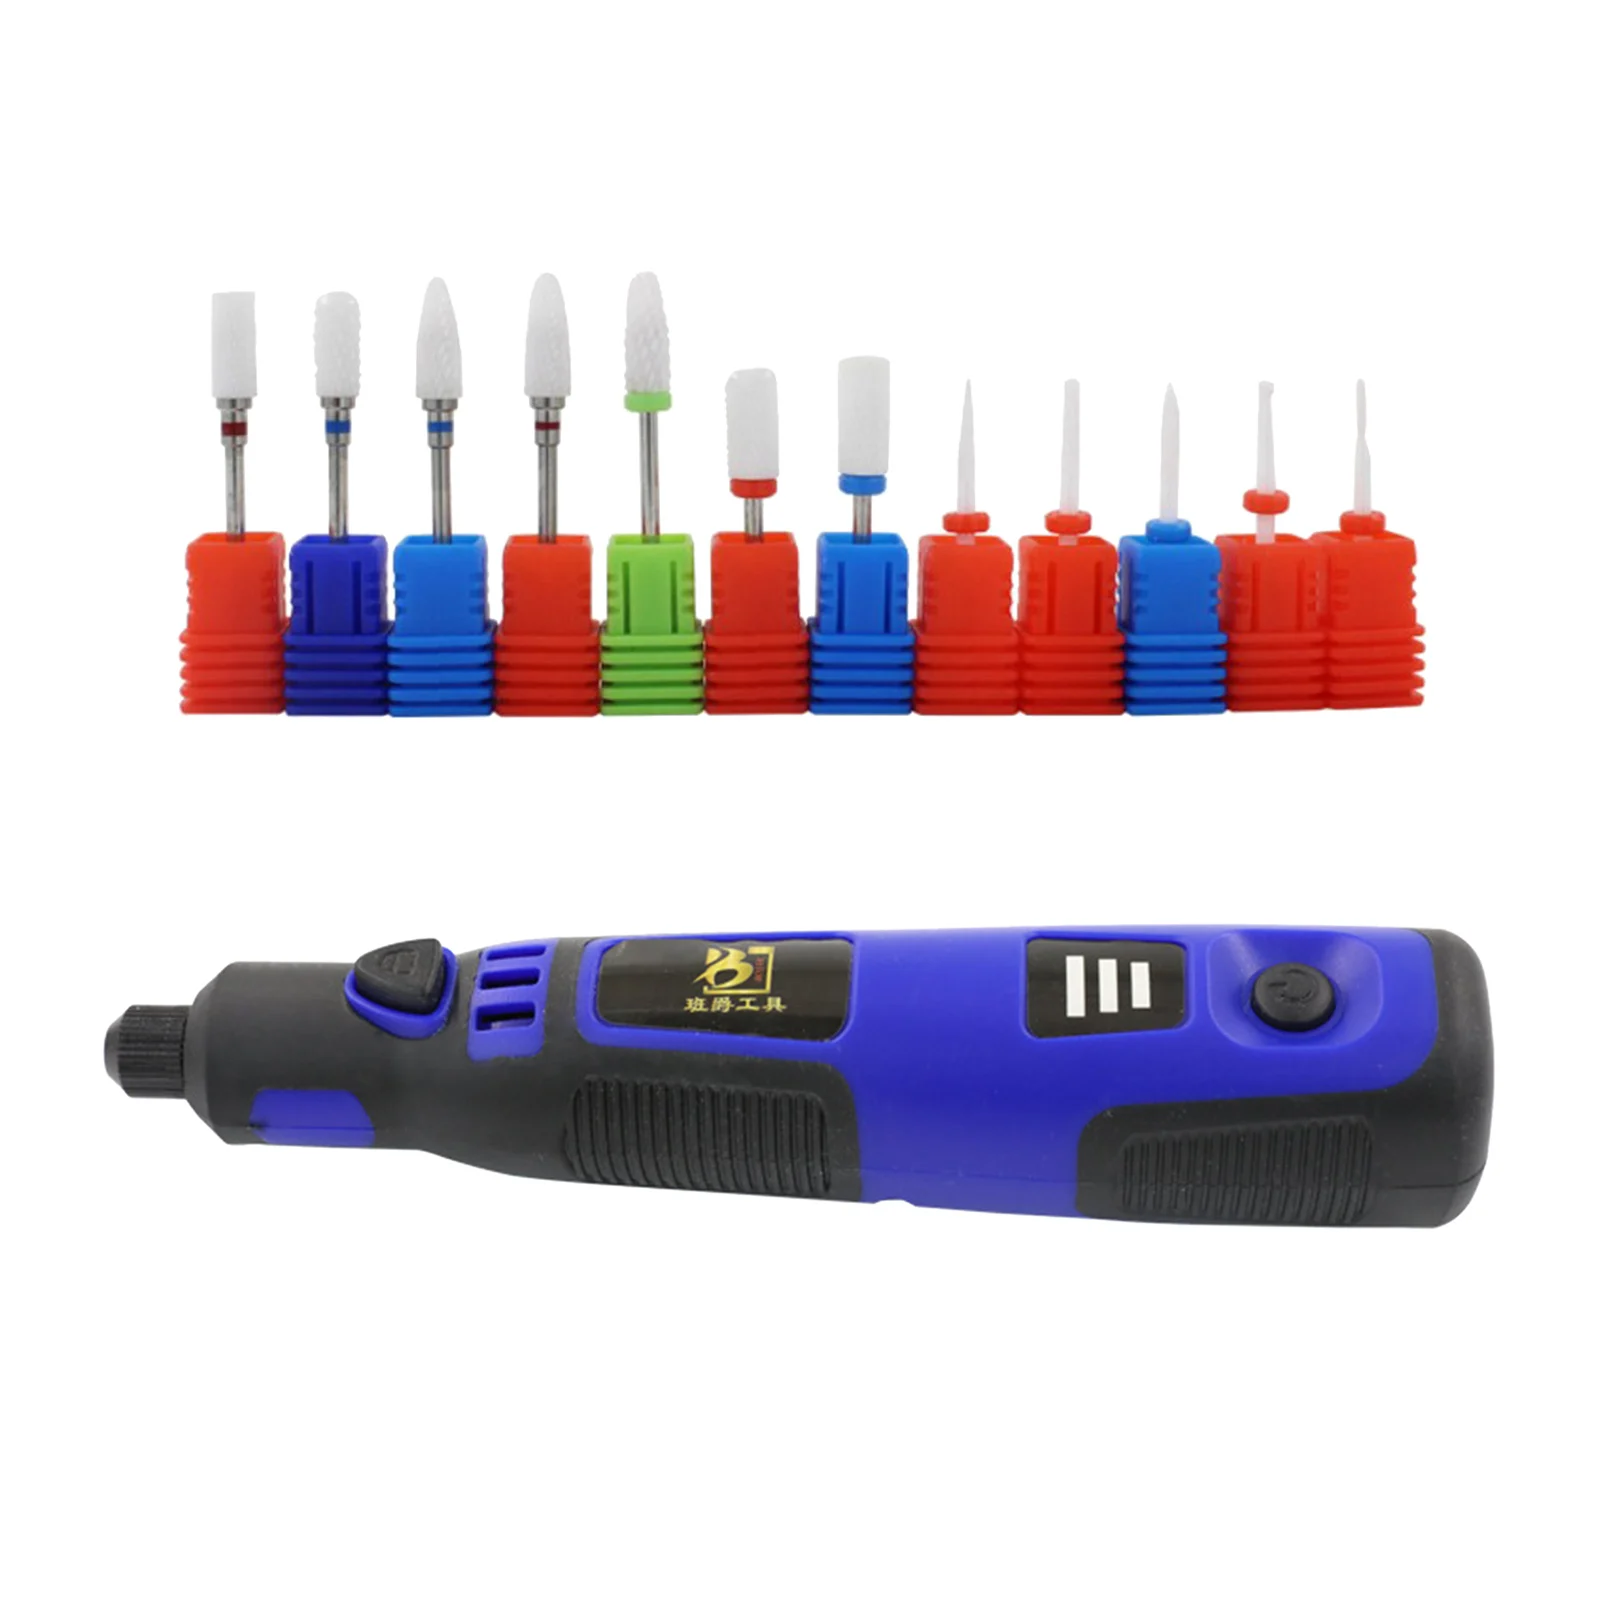 Electric 3.6V Nail Drill 3-Gear Speed 5000-15000rpm Manicure Polishing Carving Grinder Pen Home Salon DIY Crafts